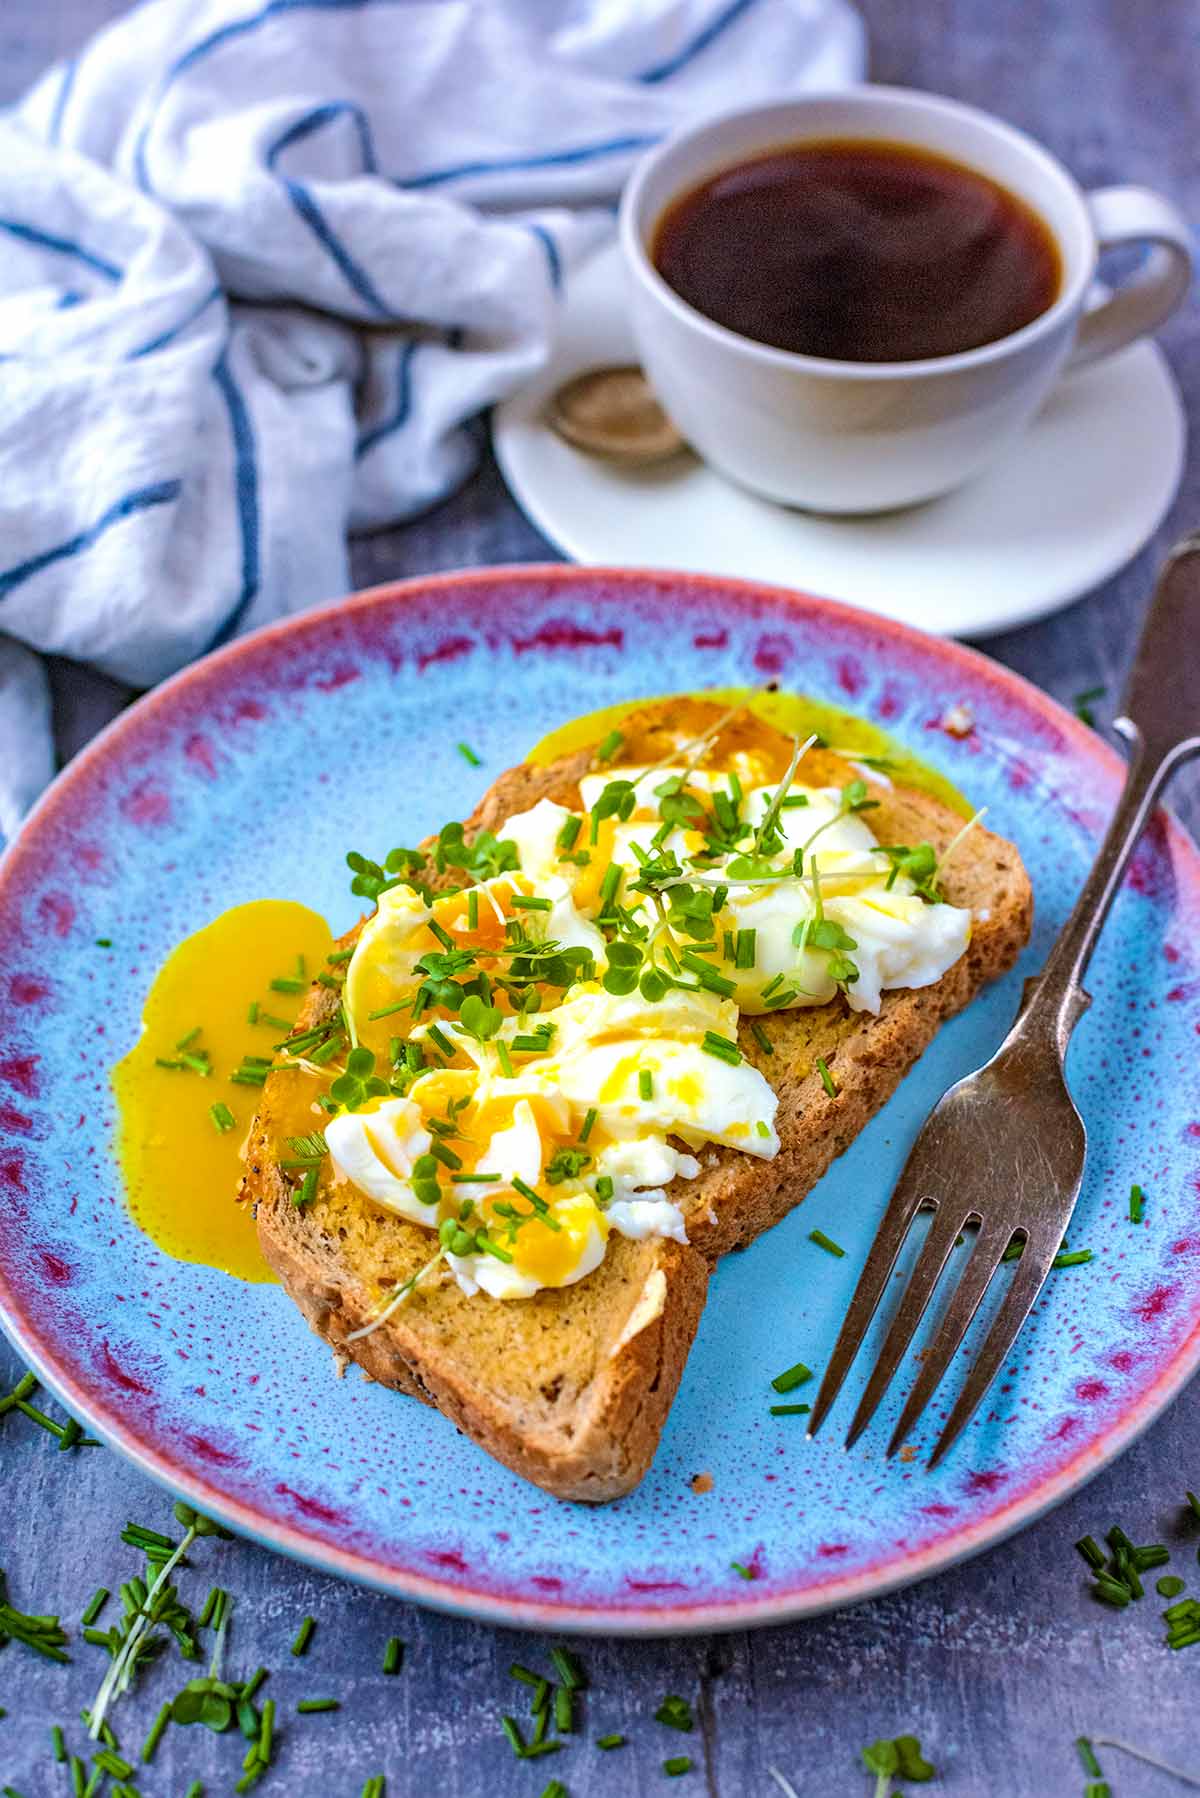 Smashed eggs on toast on a plate with a fork.